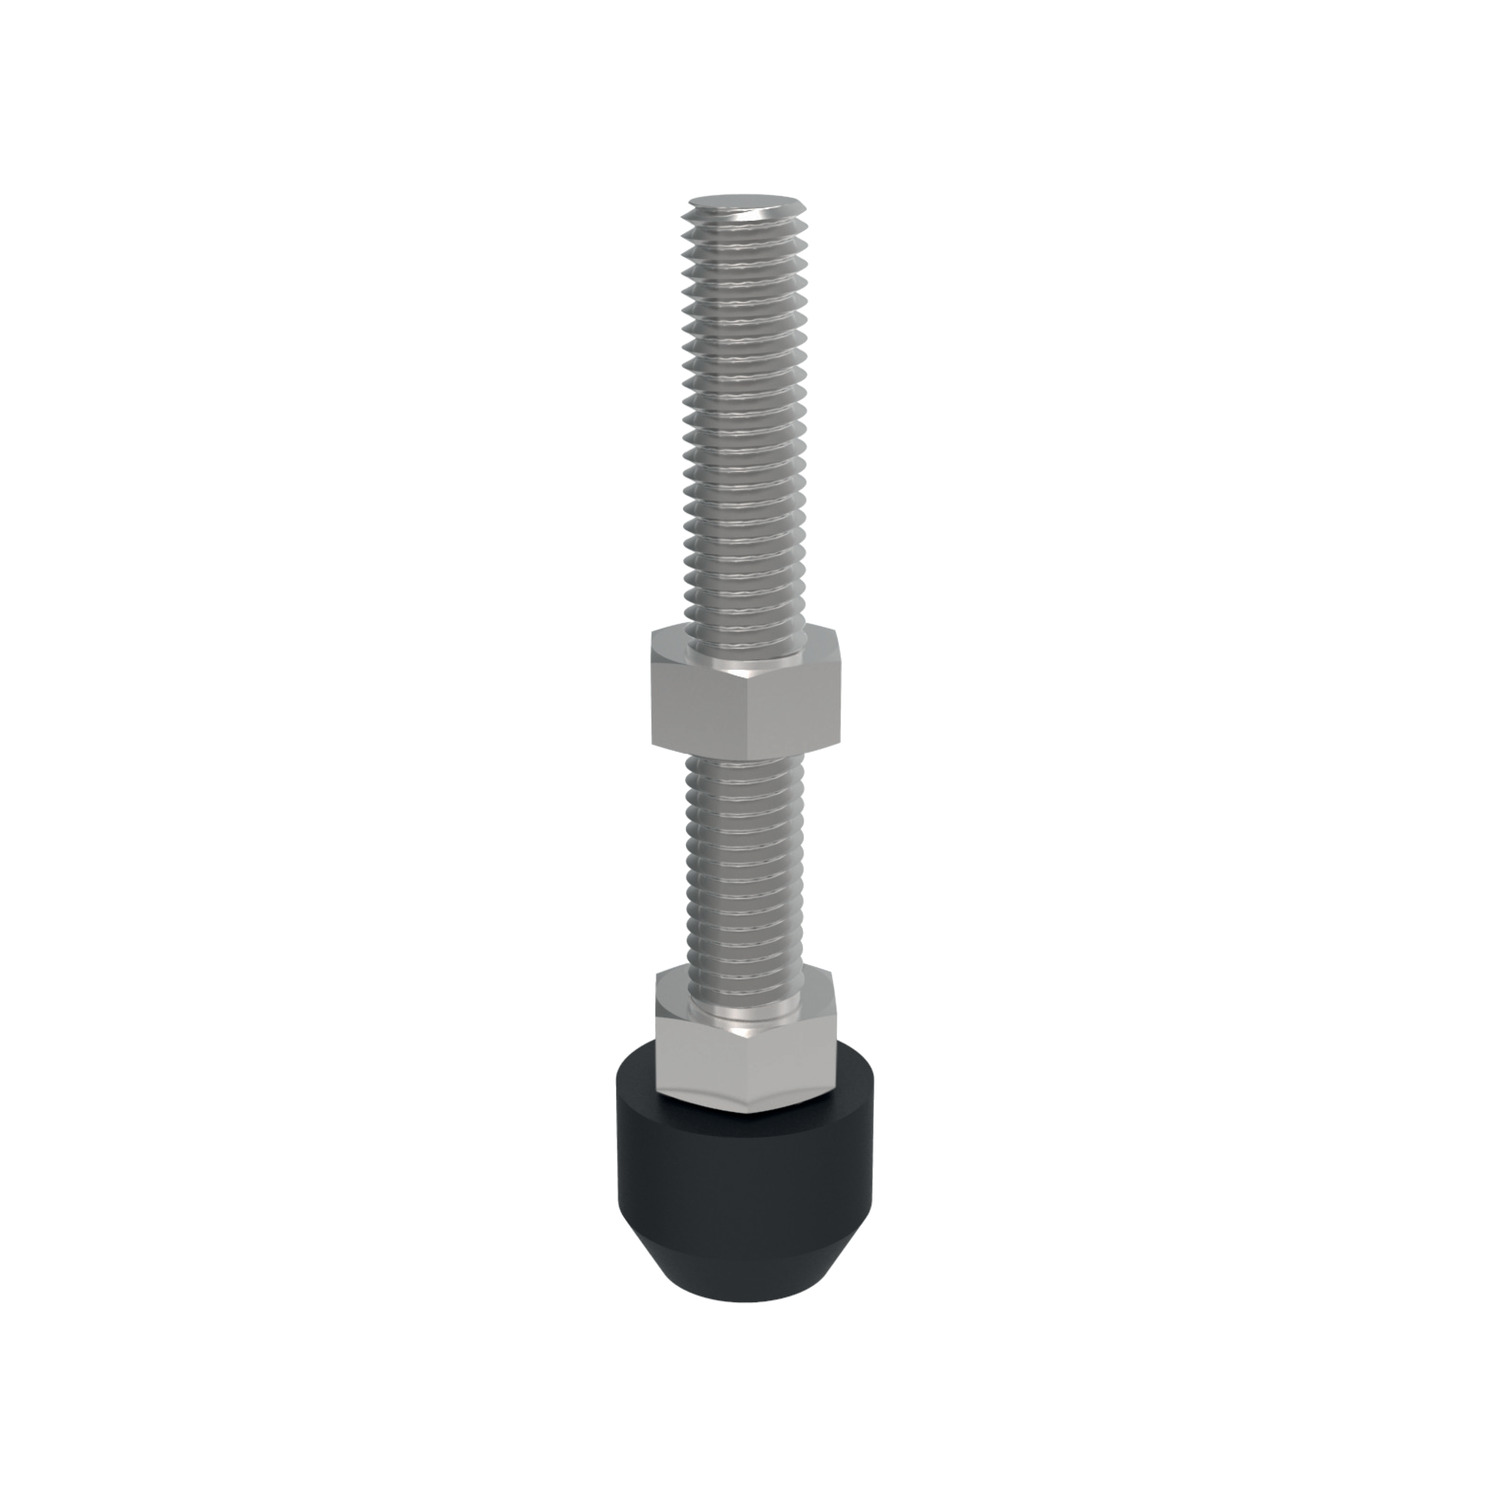 Product 45018, Clamping Screws for solid and fixed clamping arms / 